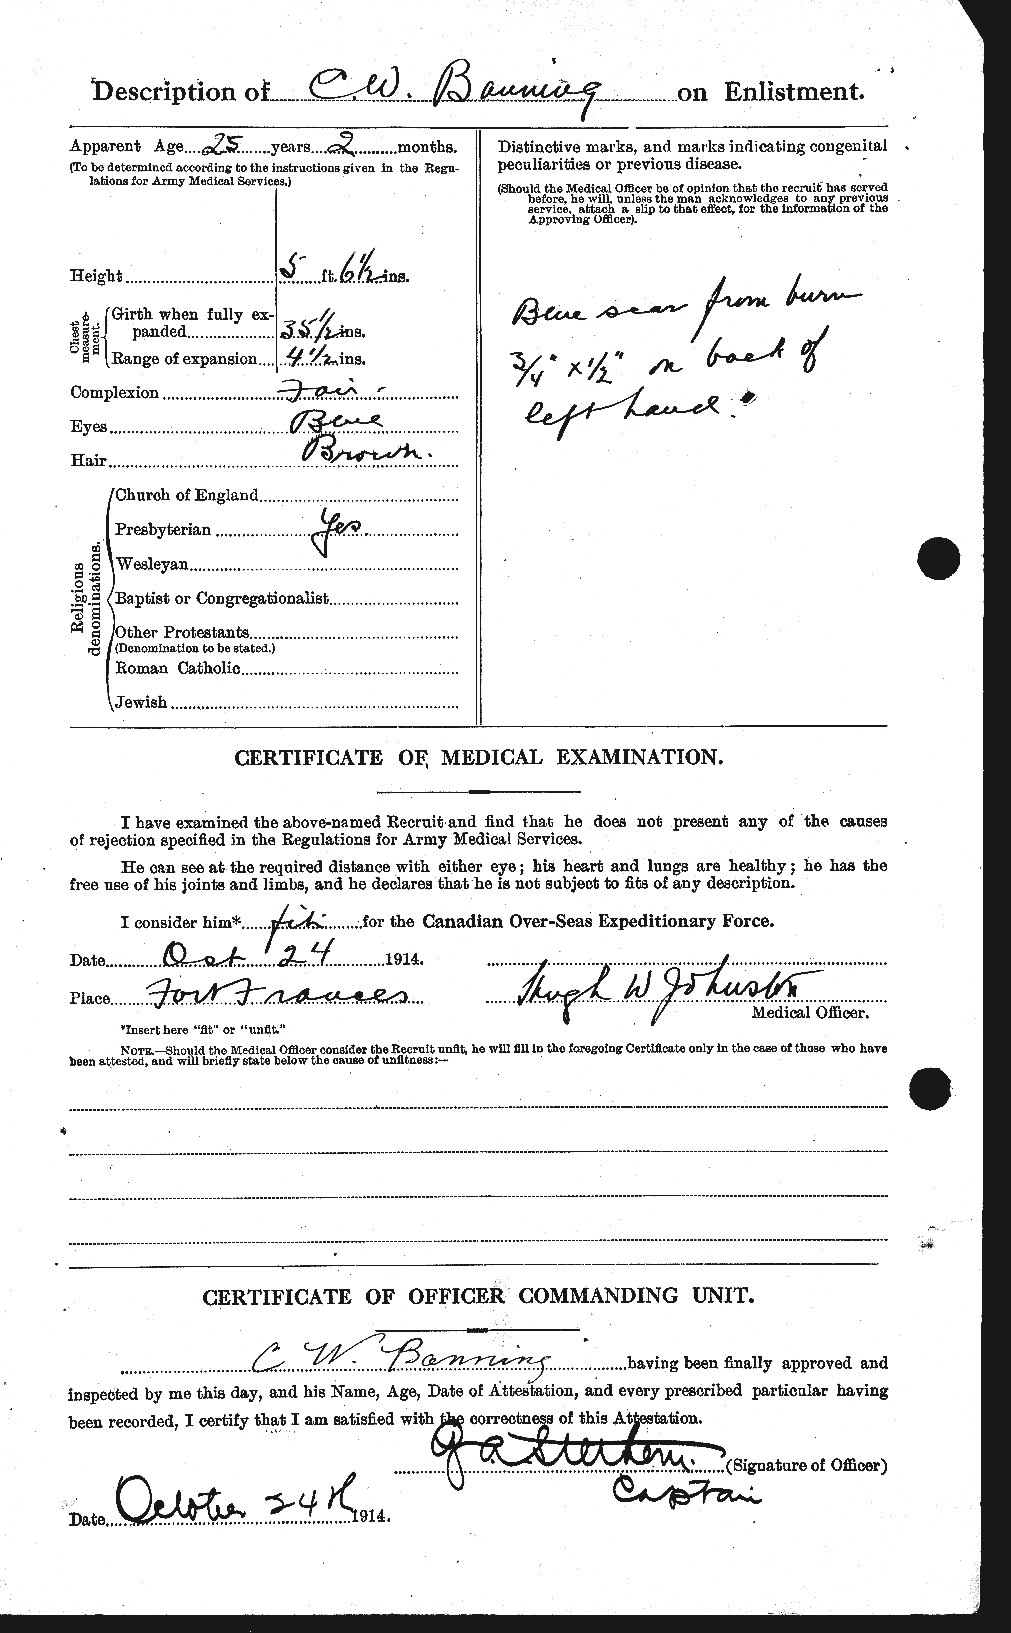 Personnel Records of the First World War - CEF 224832b